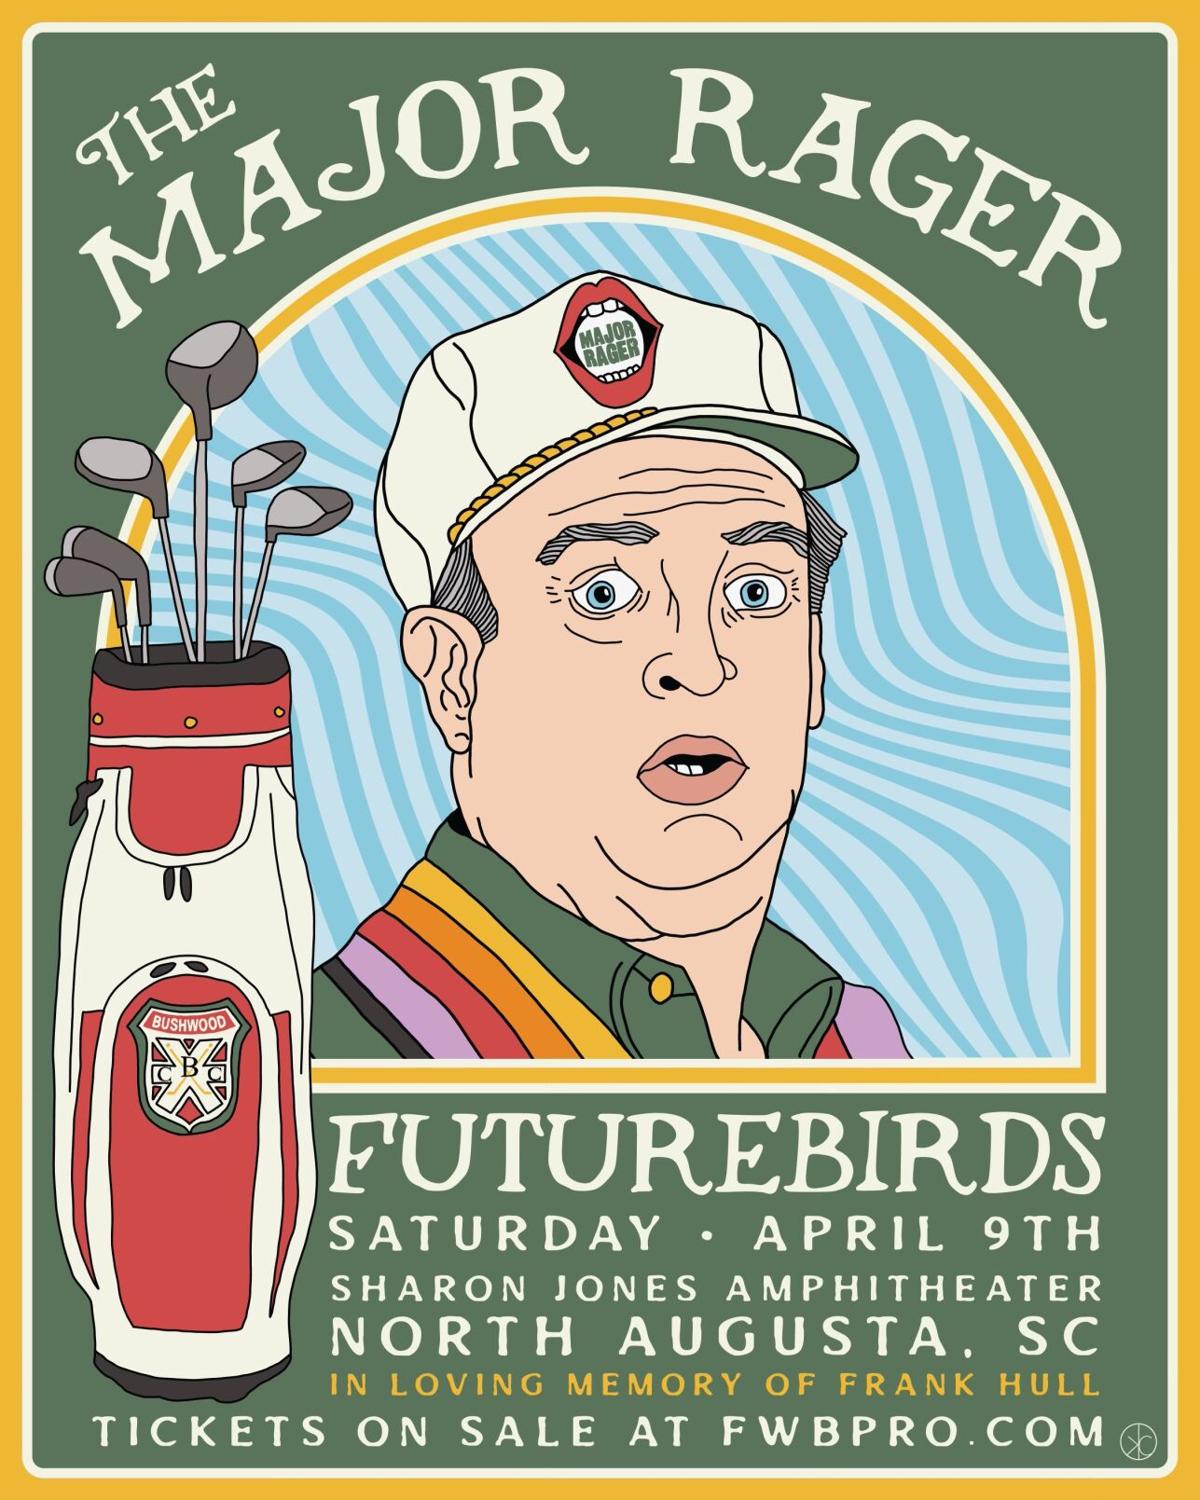 Major Rager concert returns to North Augusta during 2022 Masters